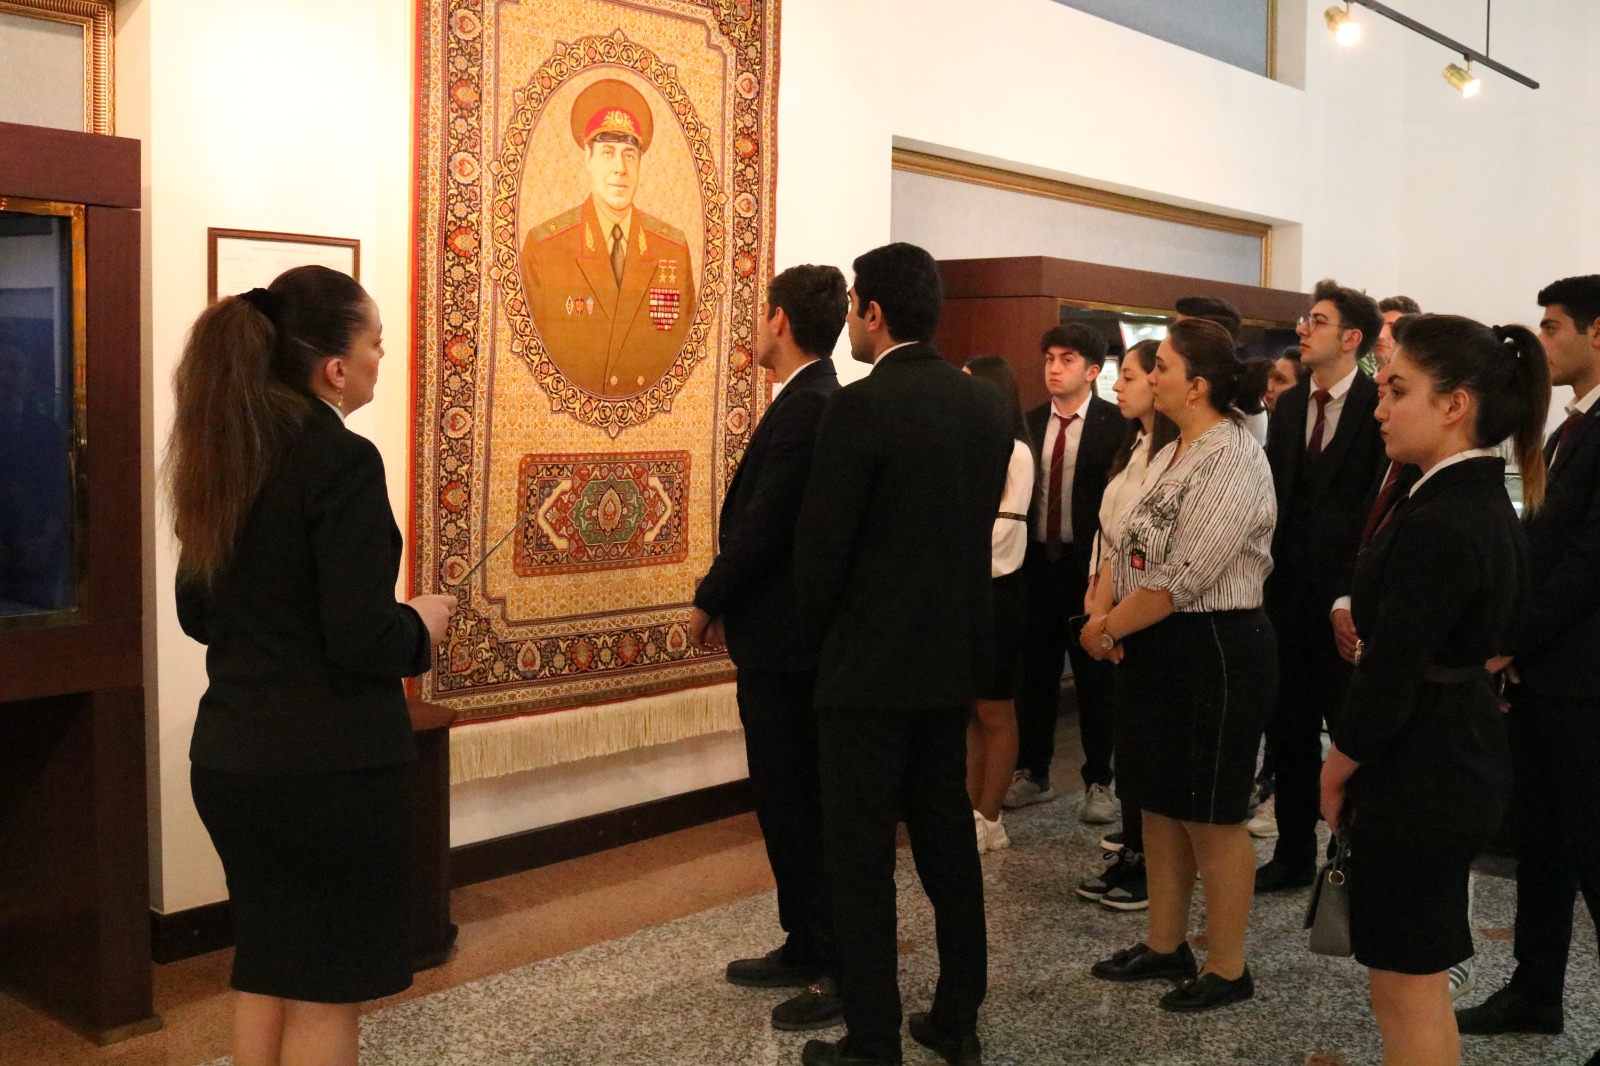 An excursion of the students to the Heydar Aliyev Museum was organized